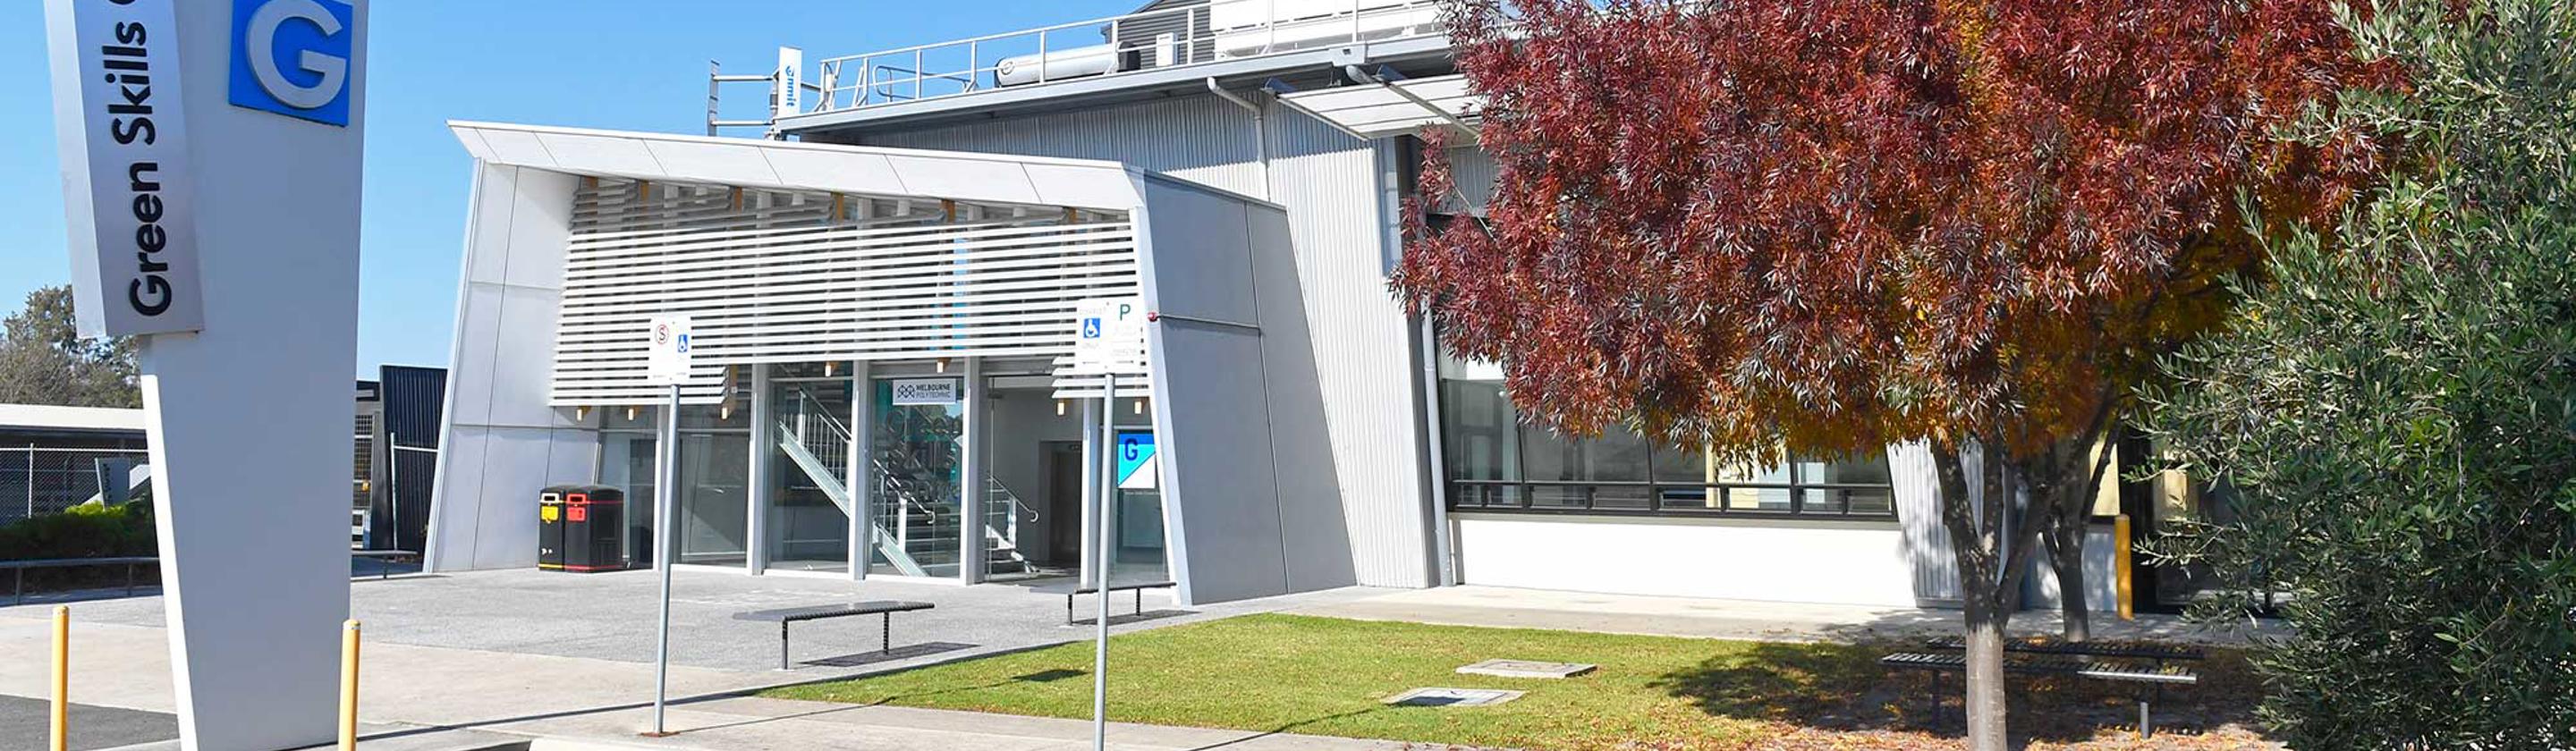 Image of Epping Campus front of building G - Green Skills Centre